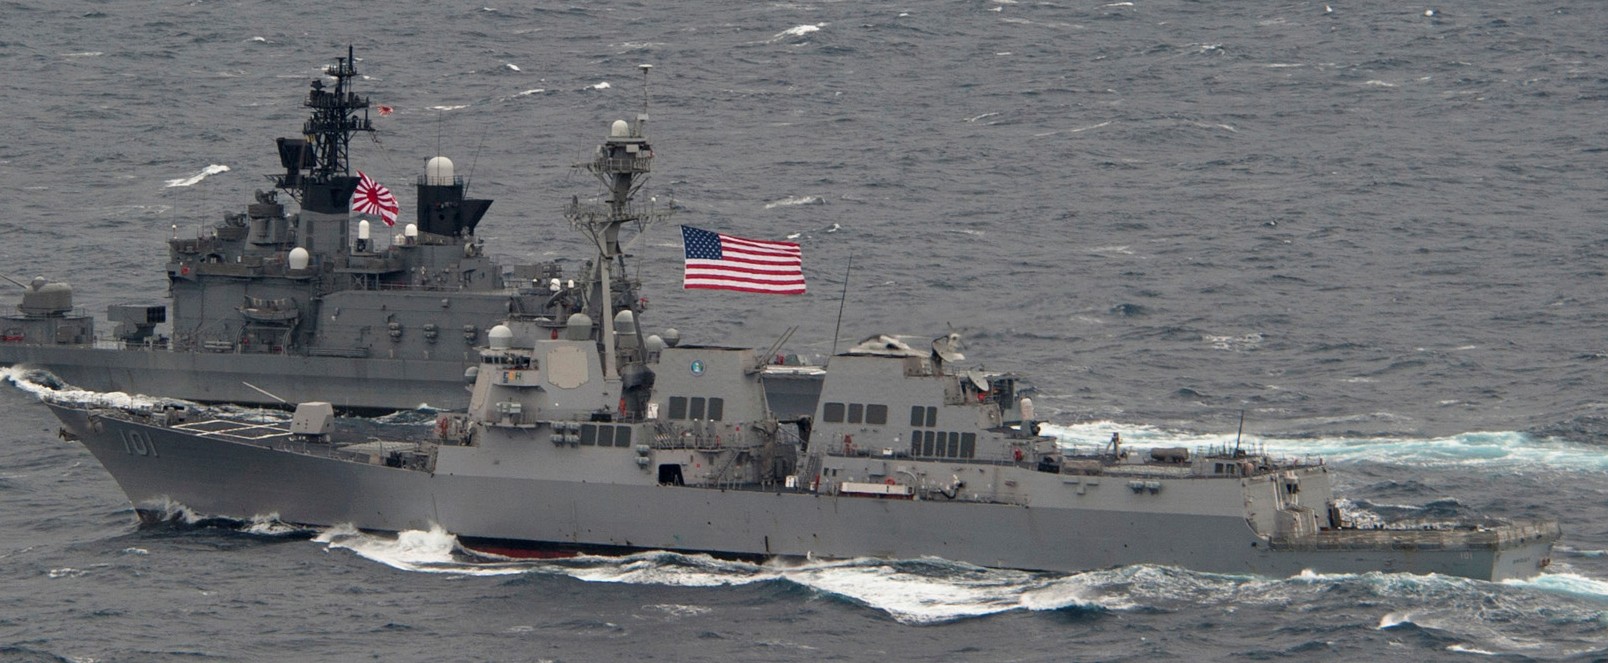 ddg-101 uss gridley arleigh burke class guided missile destroyer aegis us navy 31